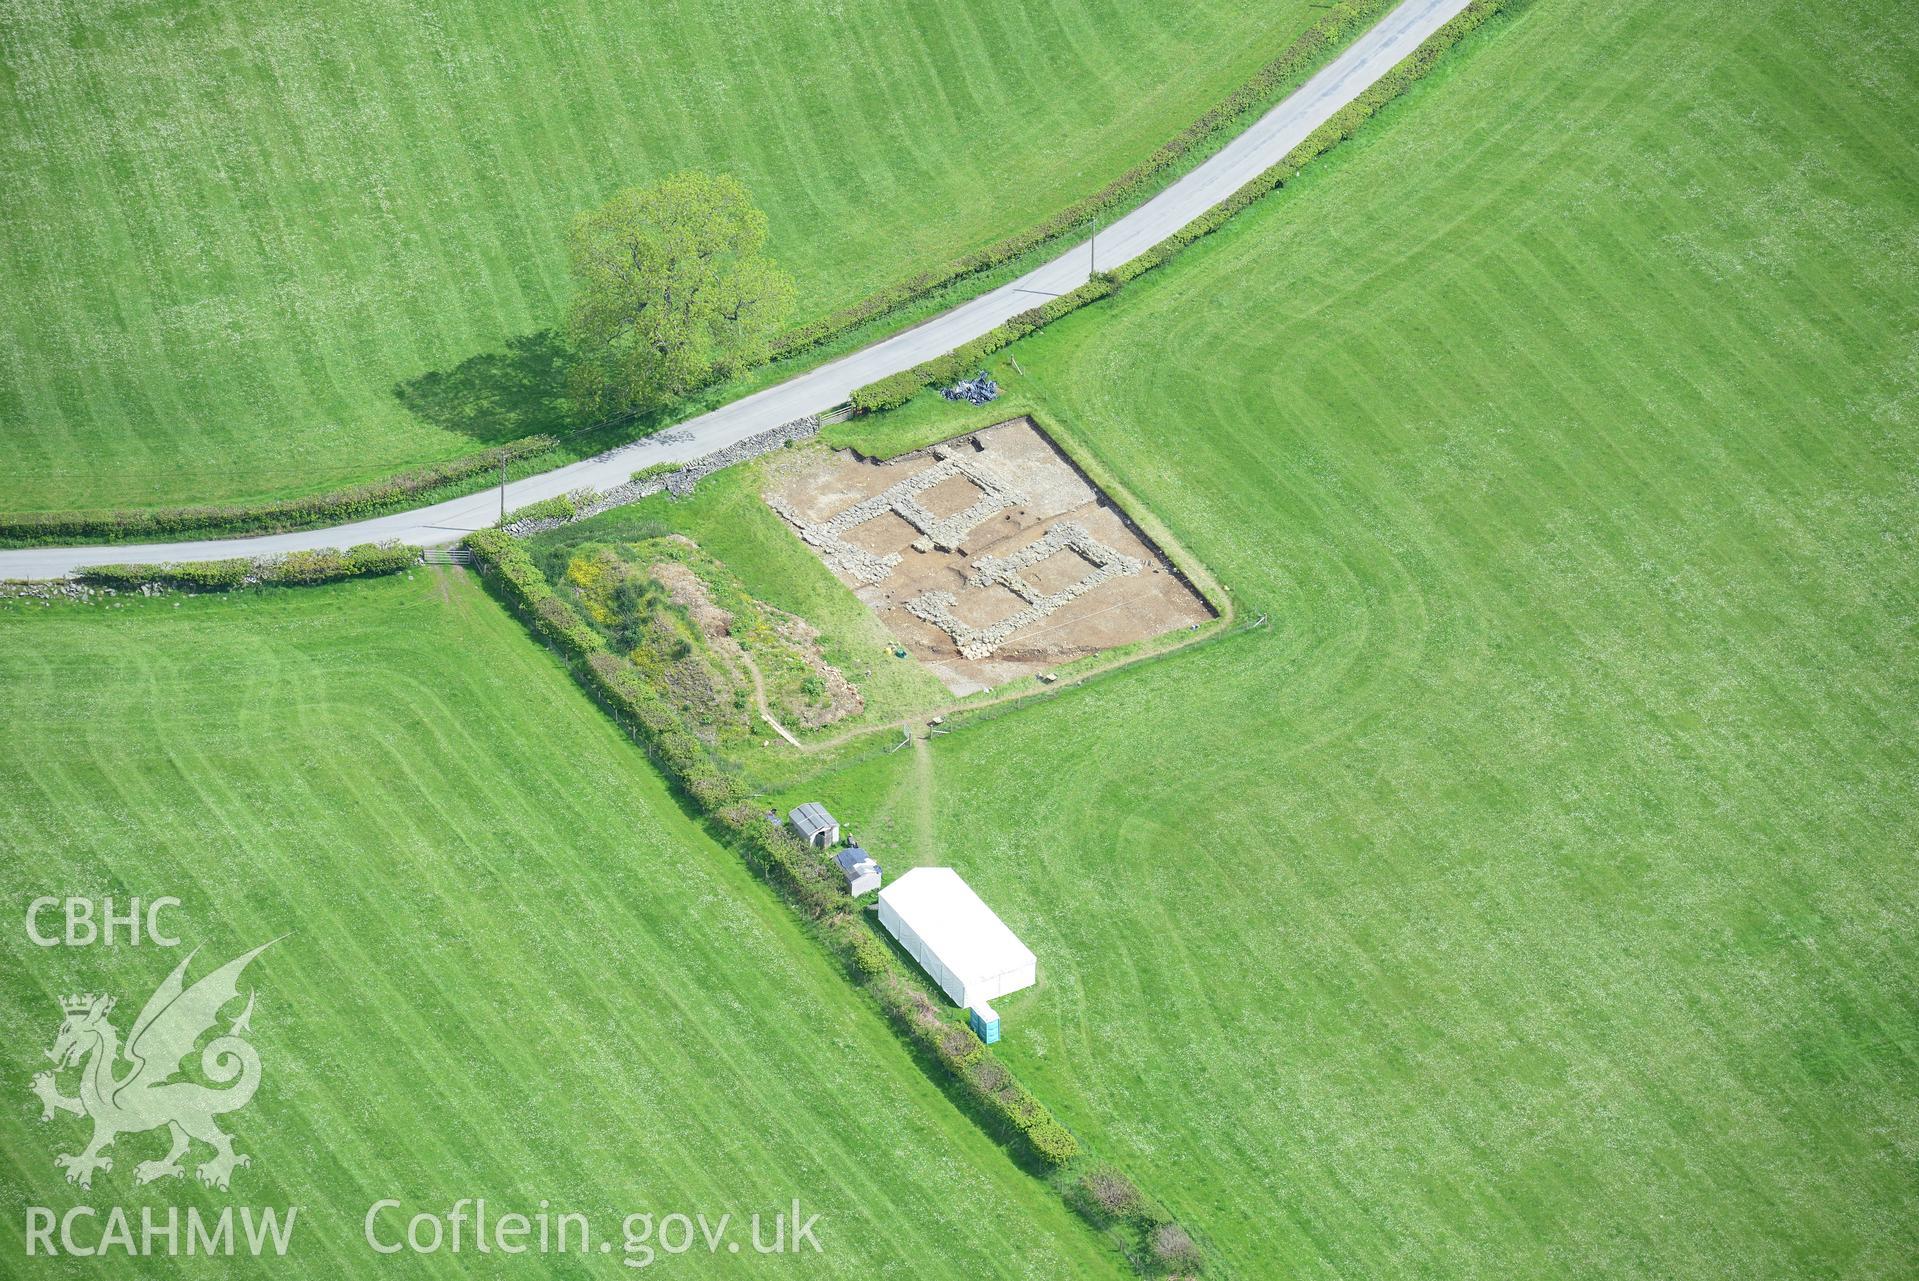 Gatehouse at Strata Florida. Oblique aerial photograph taken during the Royal Commission's programme of archaeological aerial reconnaissance by Toby Driver on 3rd June 2015.